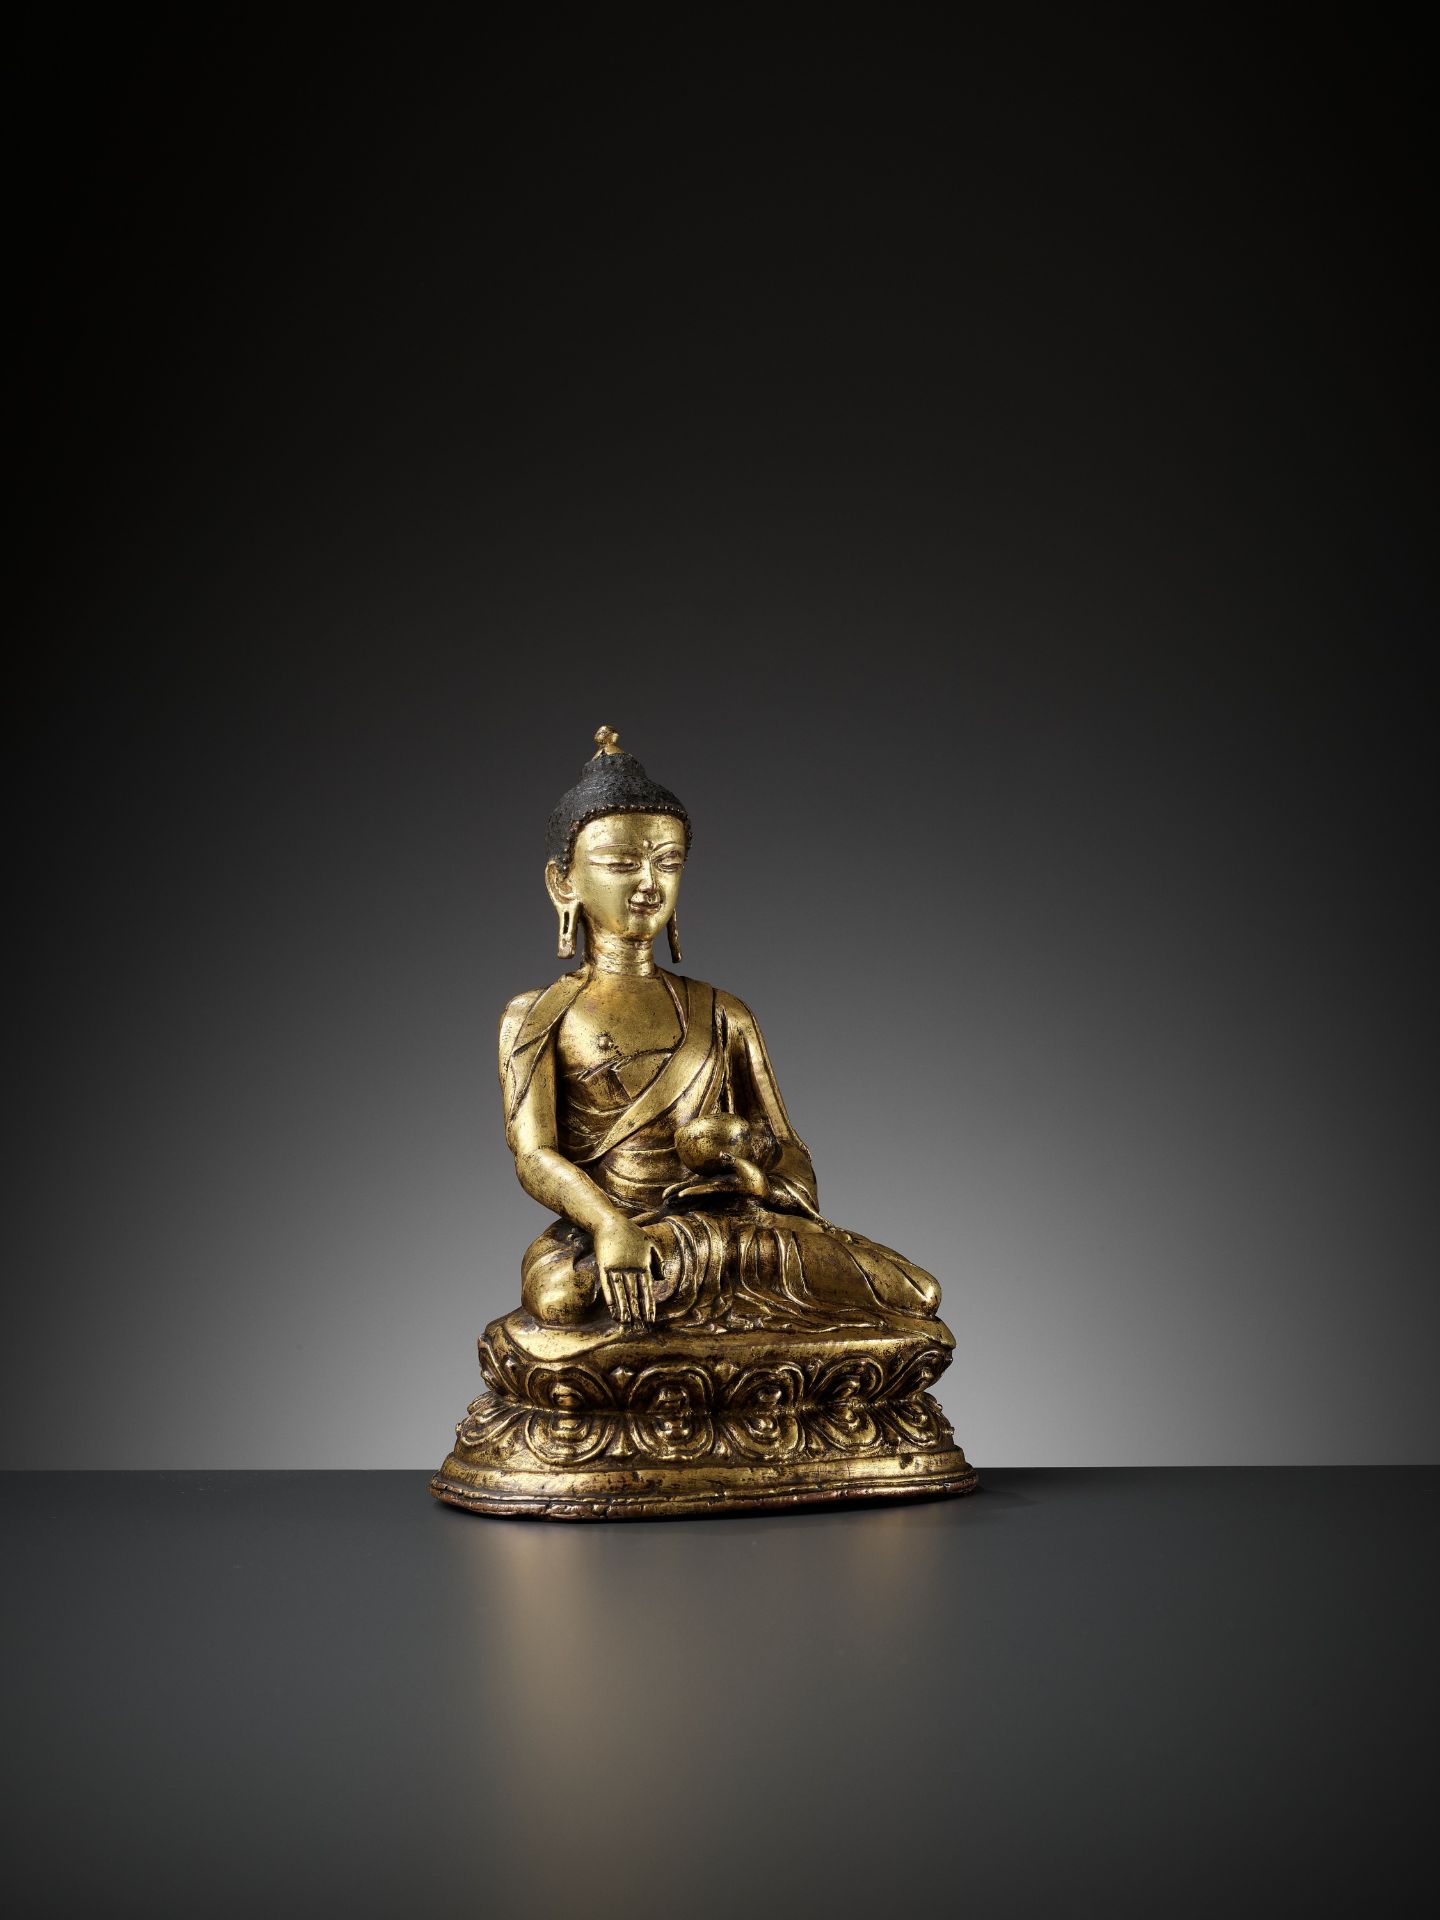 A GILT COPPER ALLOY FIGURE OF BUDDHA, 11TH-12TH CENTURY - Image 10 of 17